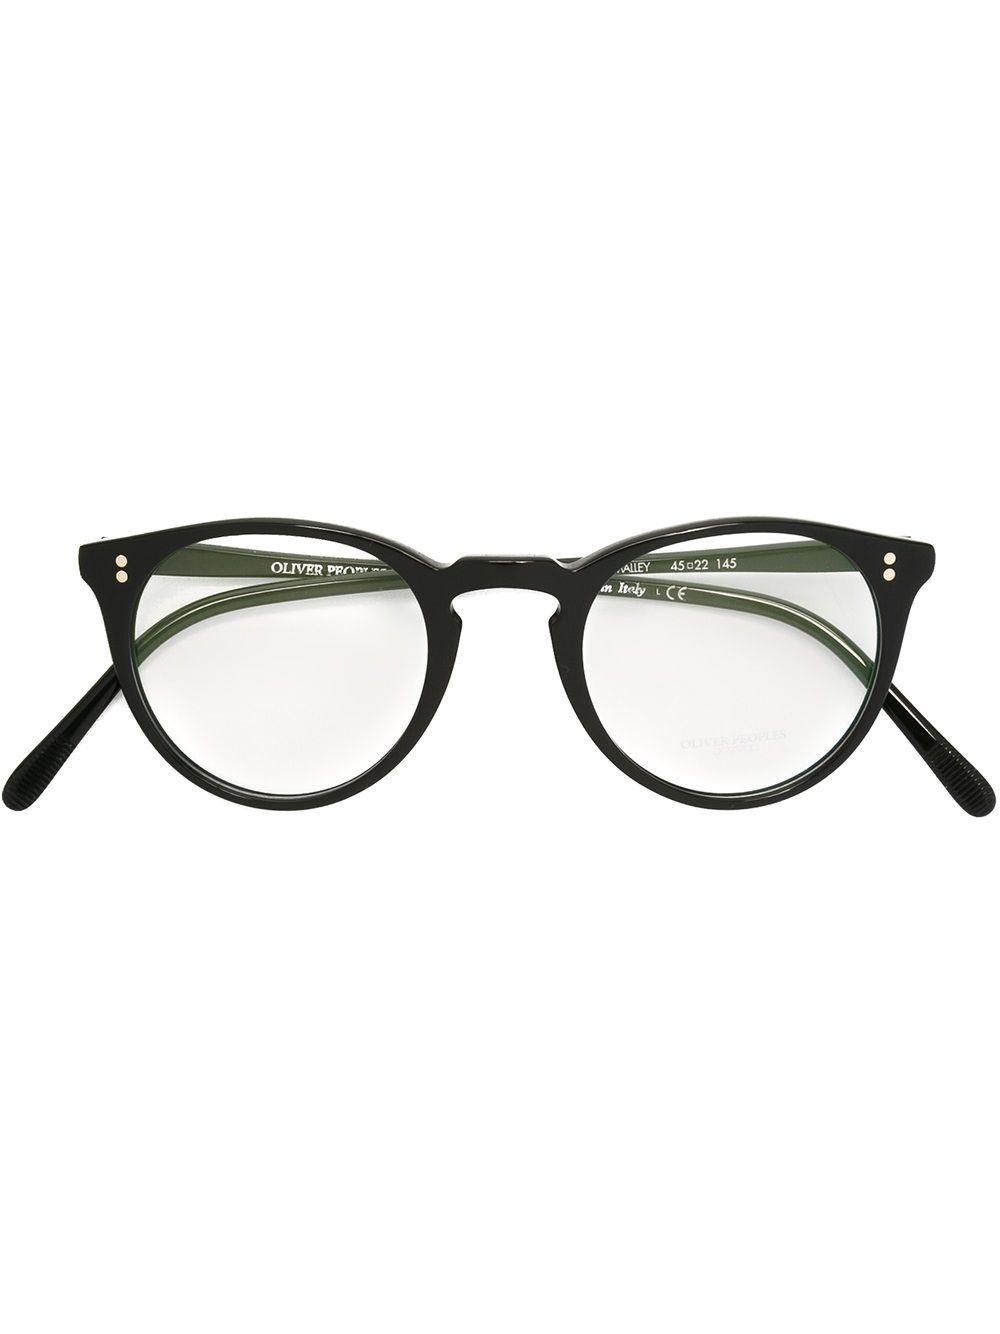 Oliver Peoples 'O'Malley' glasses